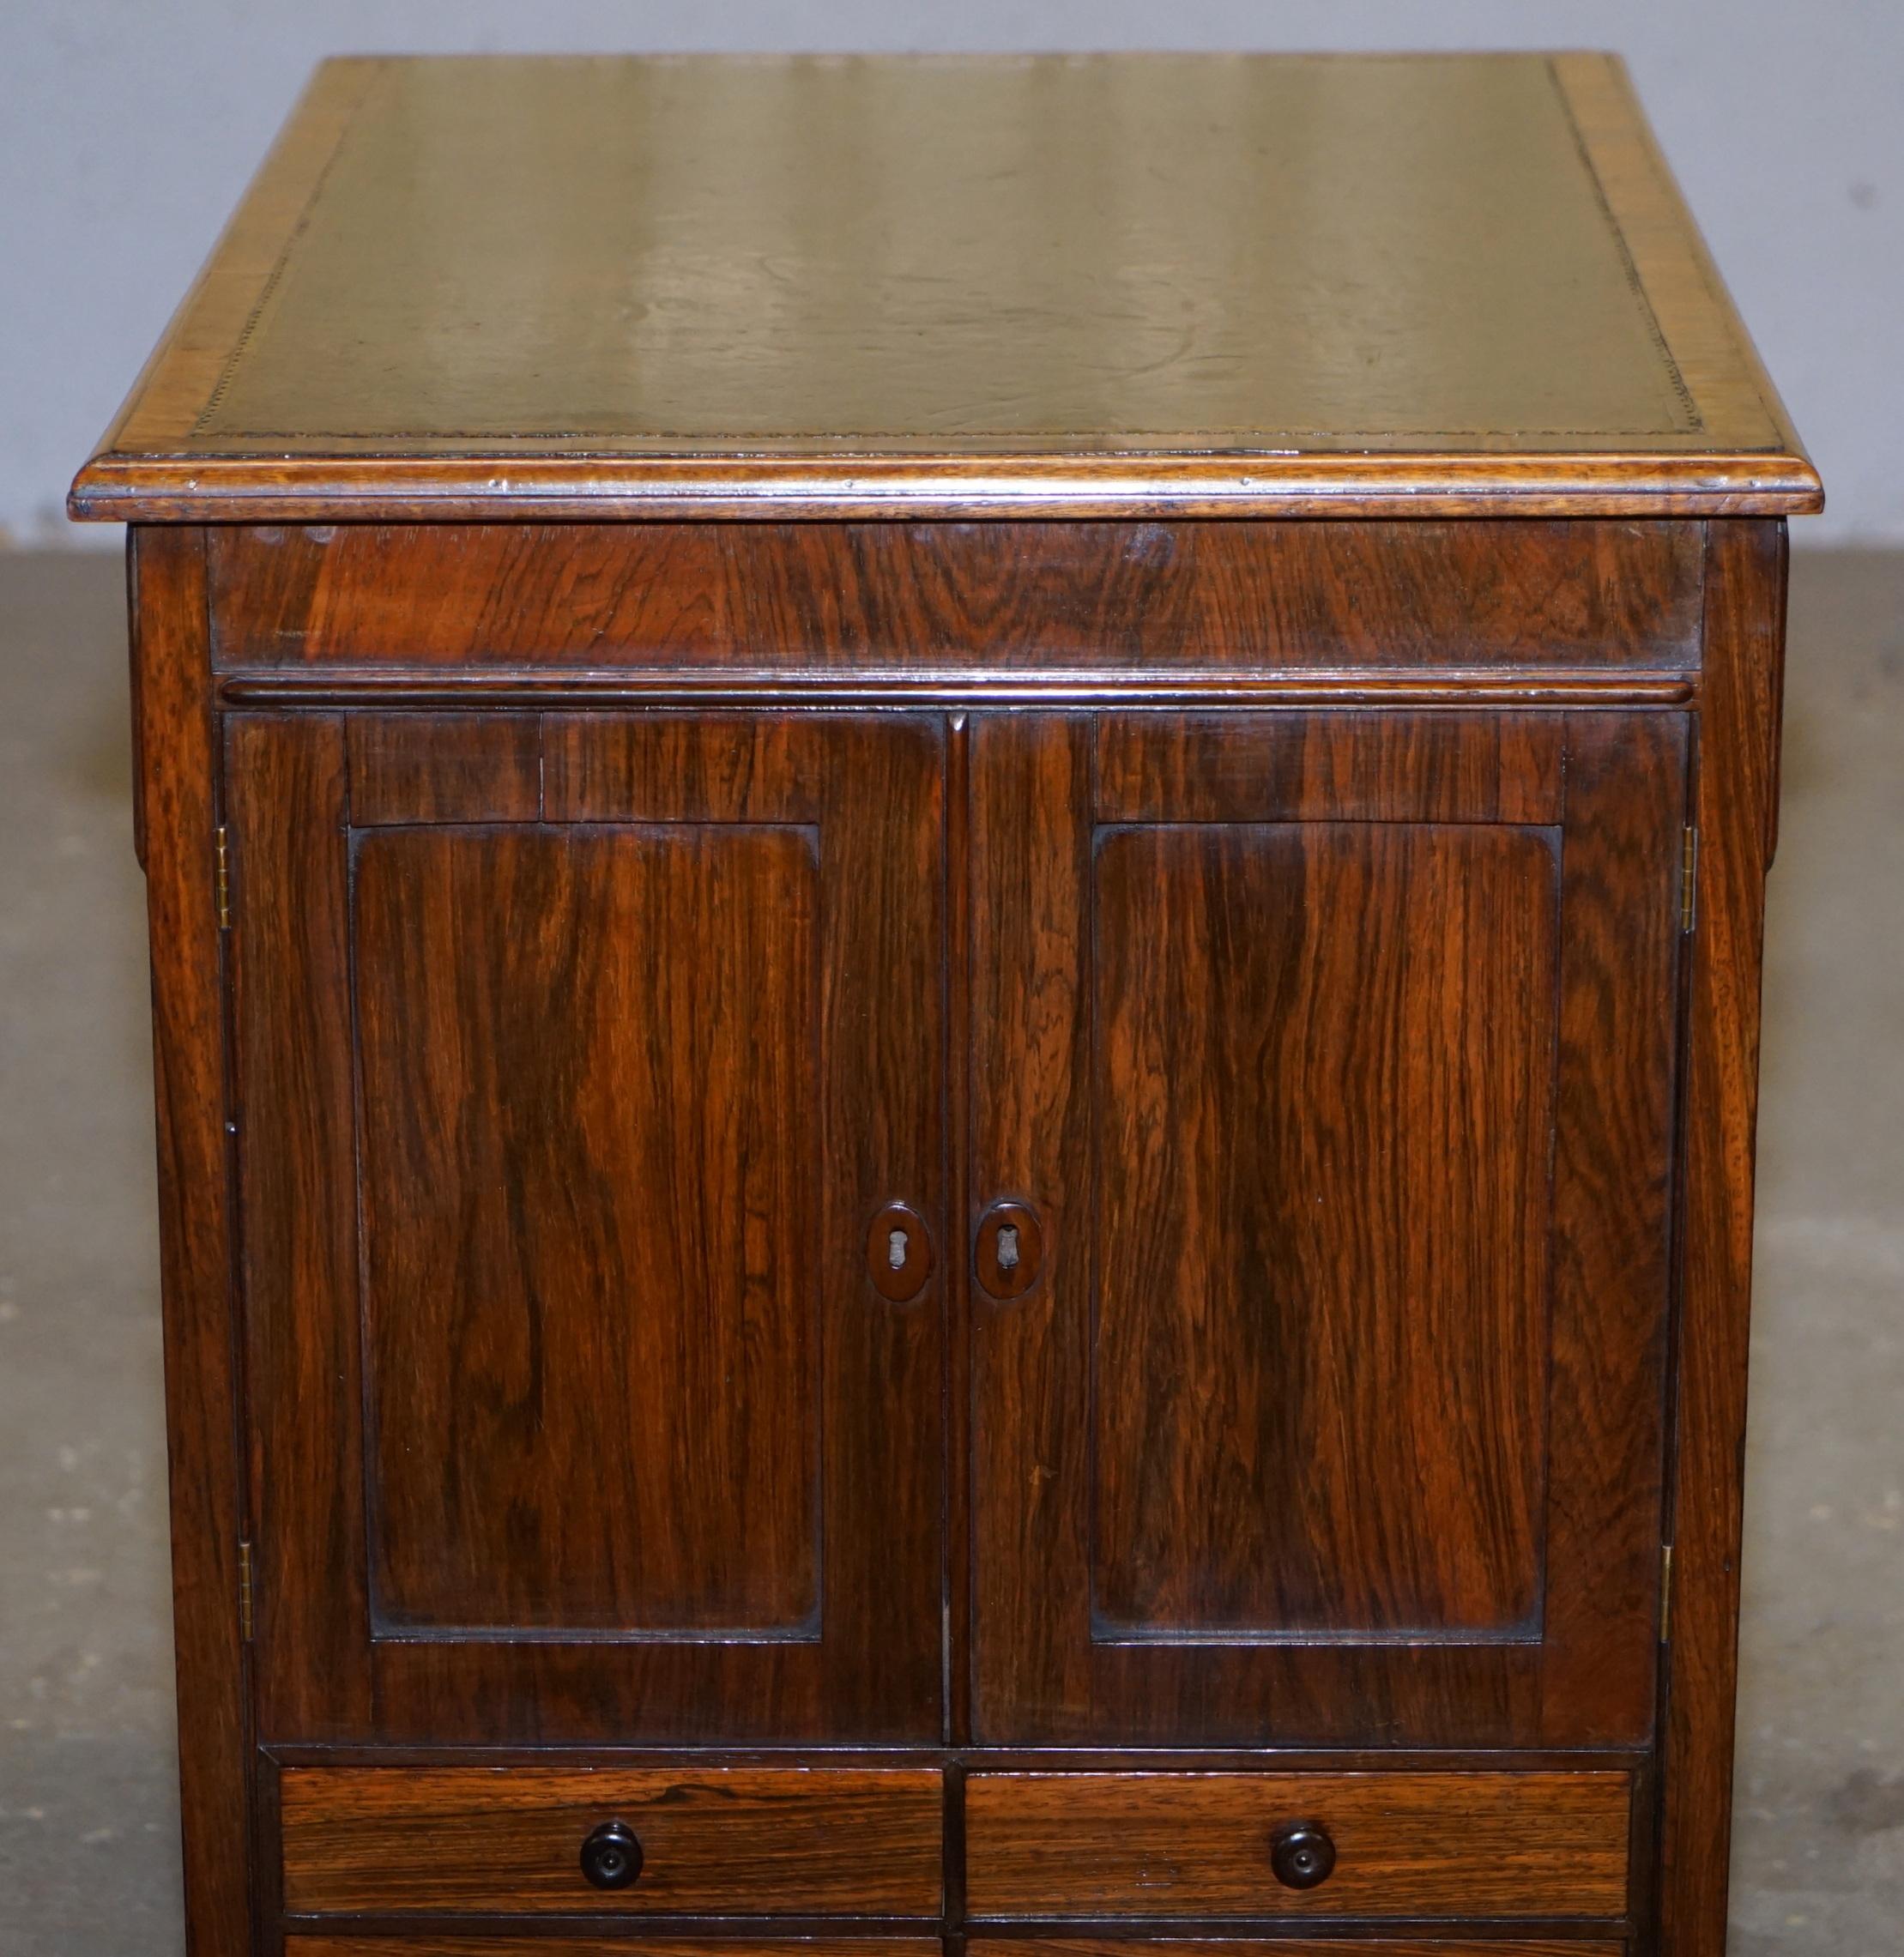 RARE WILLIAM IV CIRCA 1830 HARDWOOD LIBRARY FOLIO CABiNET WITH DRAWERS BOOKCASE For Sale 11